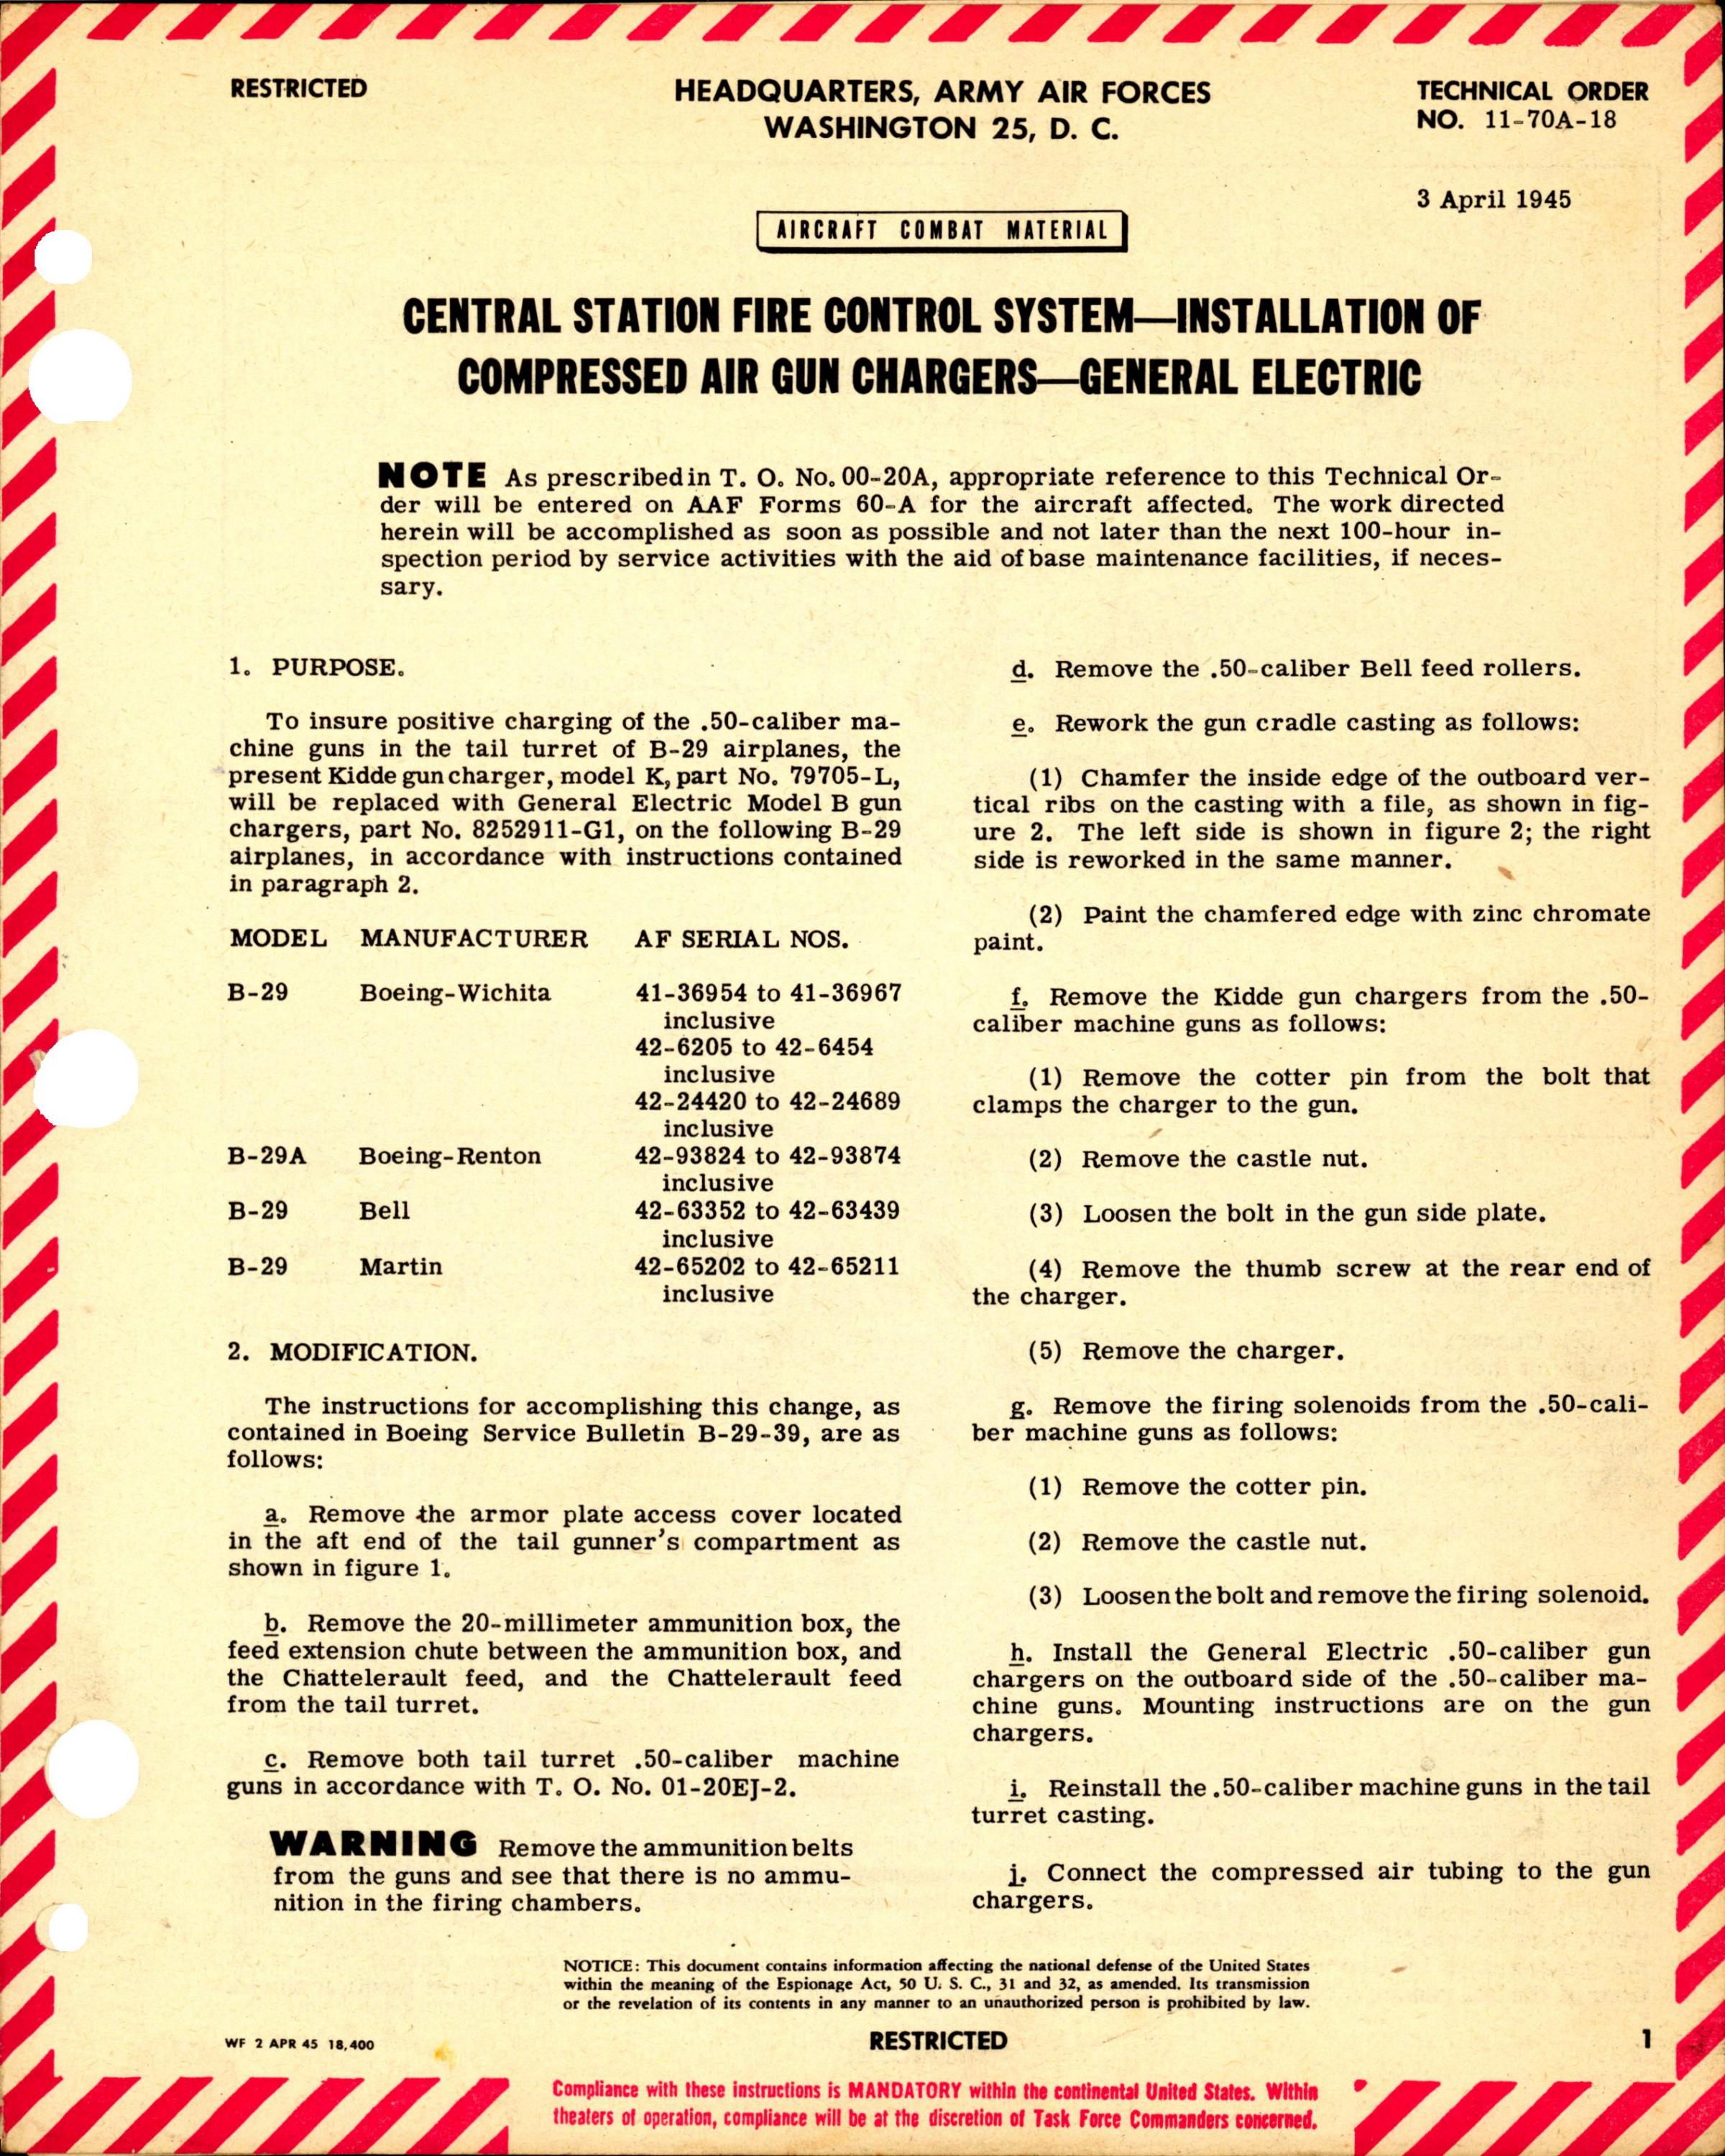 Sample page 1 from AirCorps Library document: Installation of Compressed Air Gun Chargers